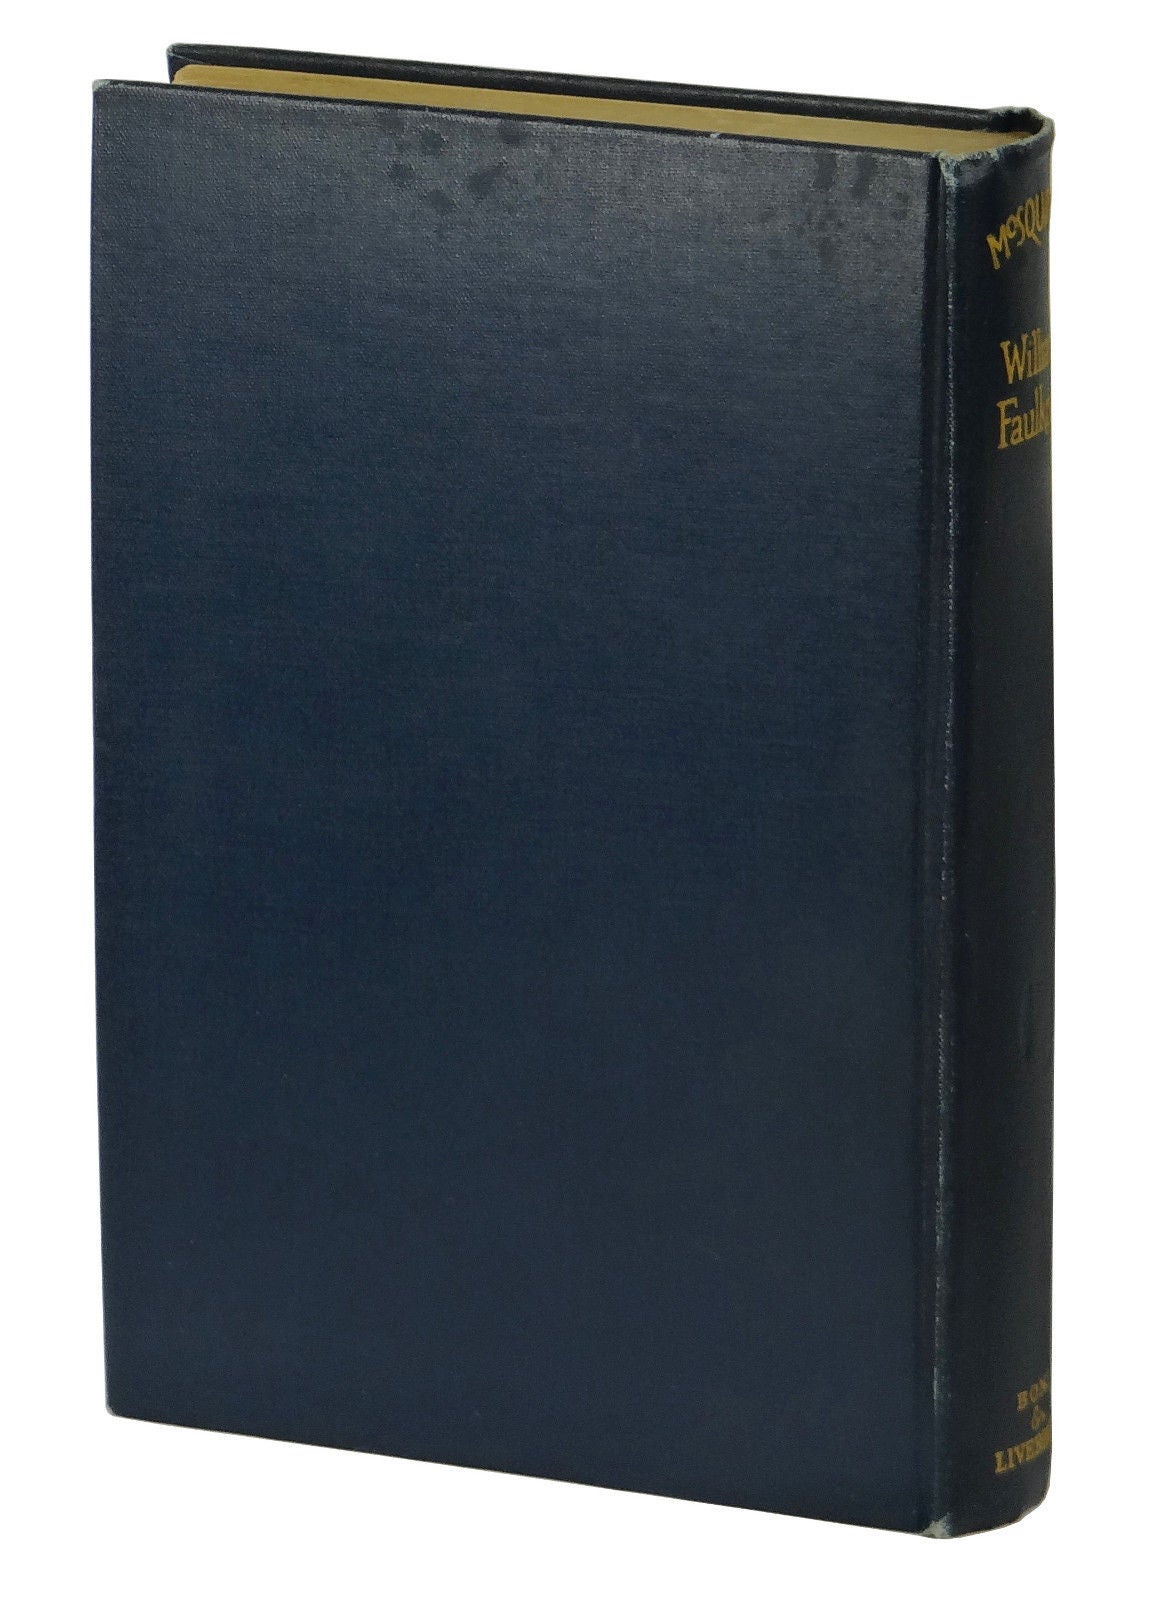 Mosquitoes | William Faulkner | First Edition